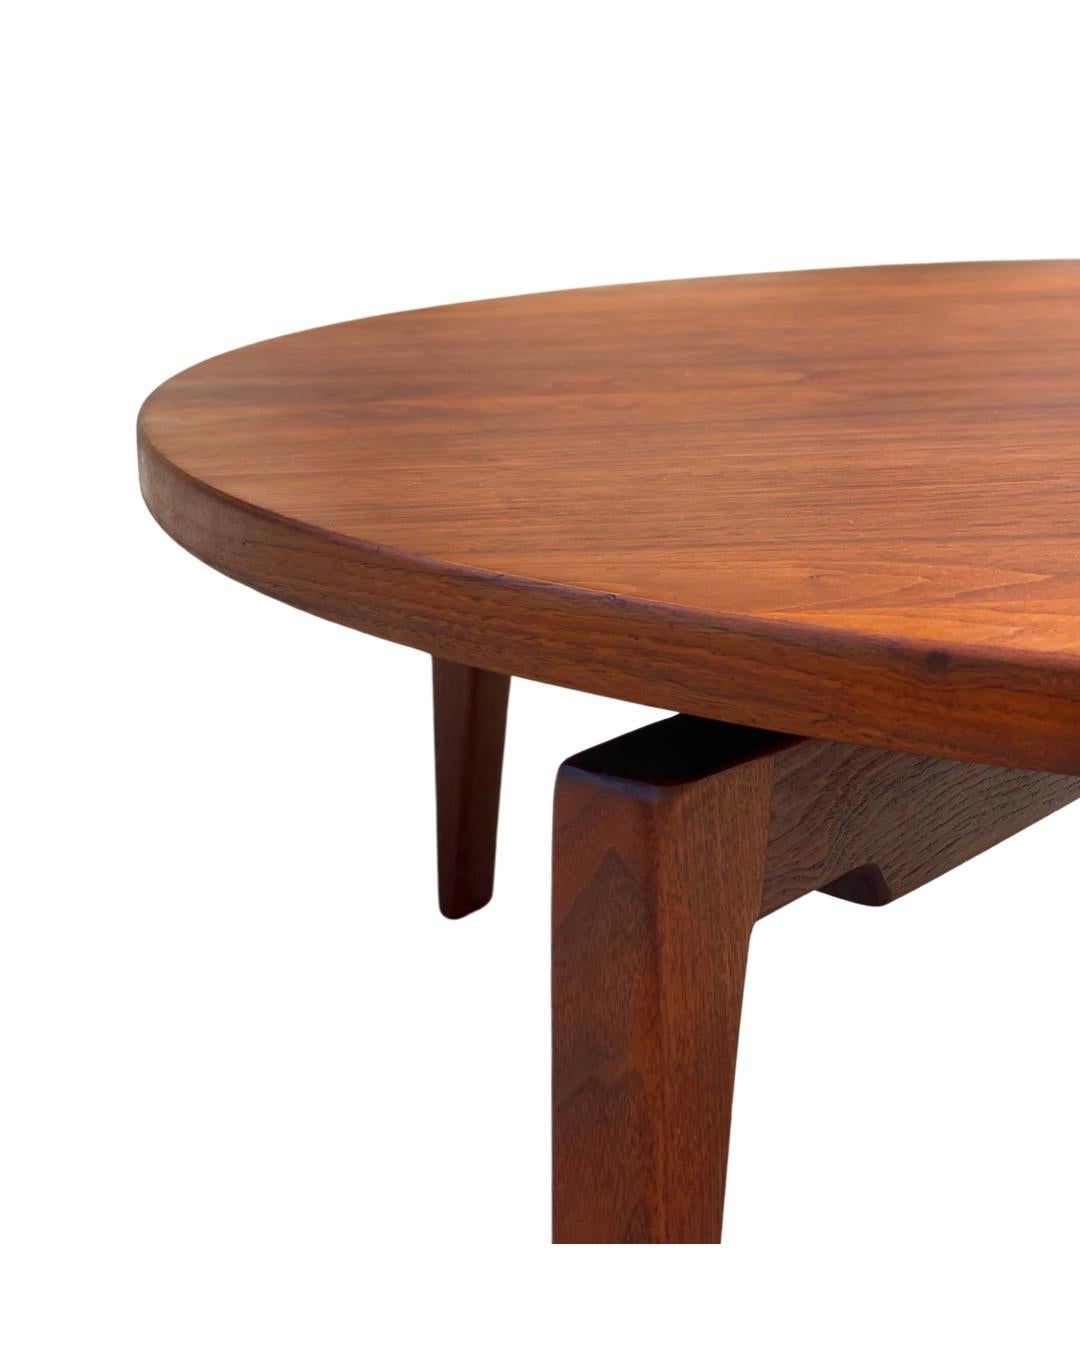 Lazy Susan round cocktail table by Jens Risom in American black walnut, circa 1958.
The floating round top rotates 360 degrees on each direction. There is a 